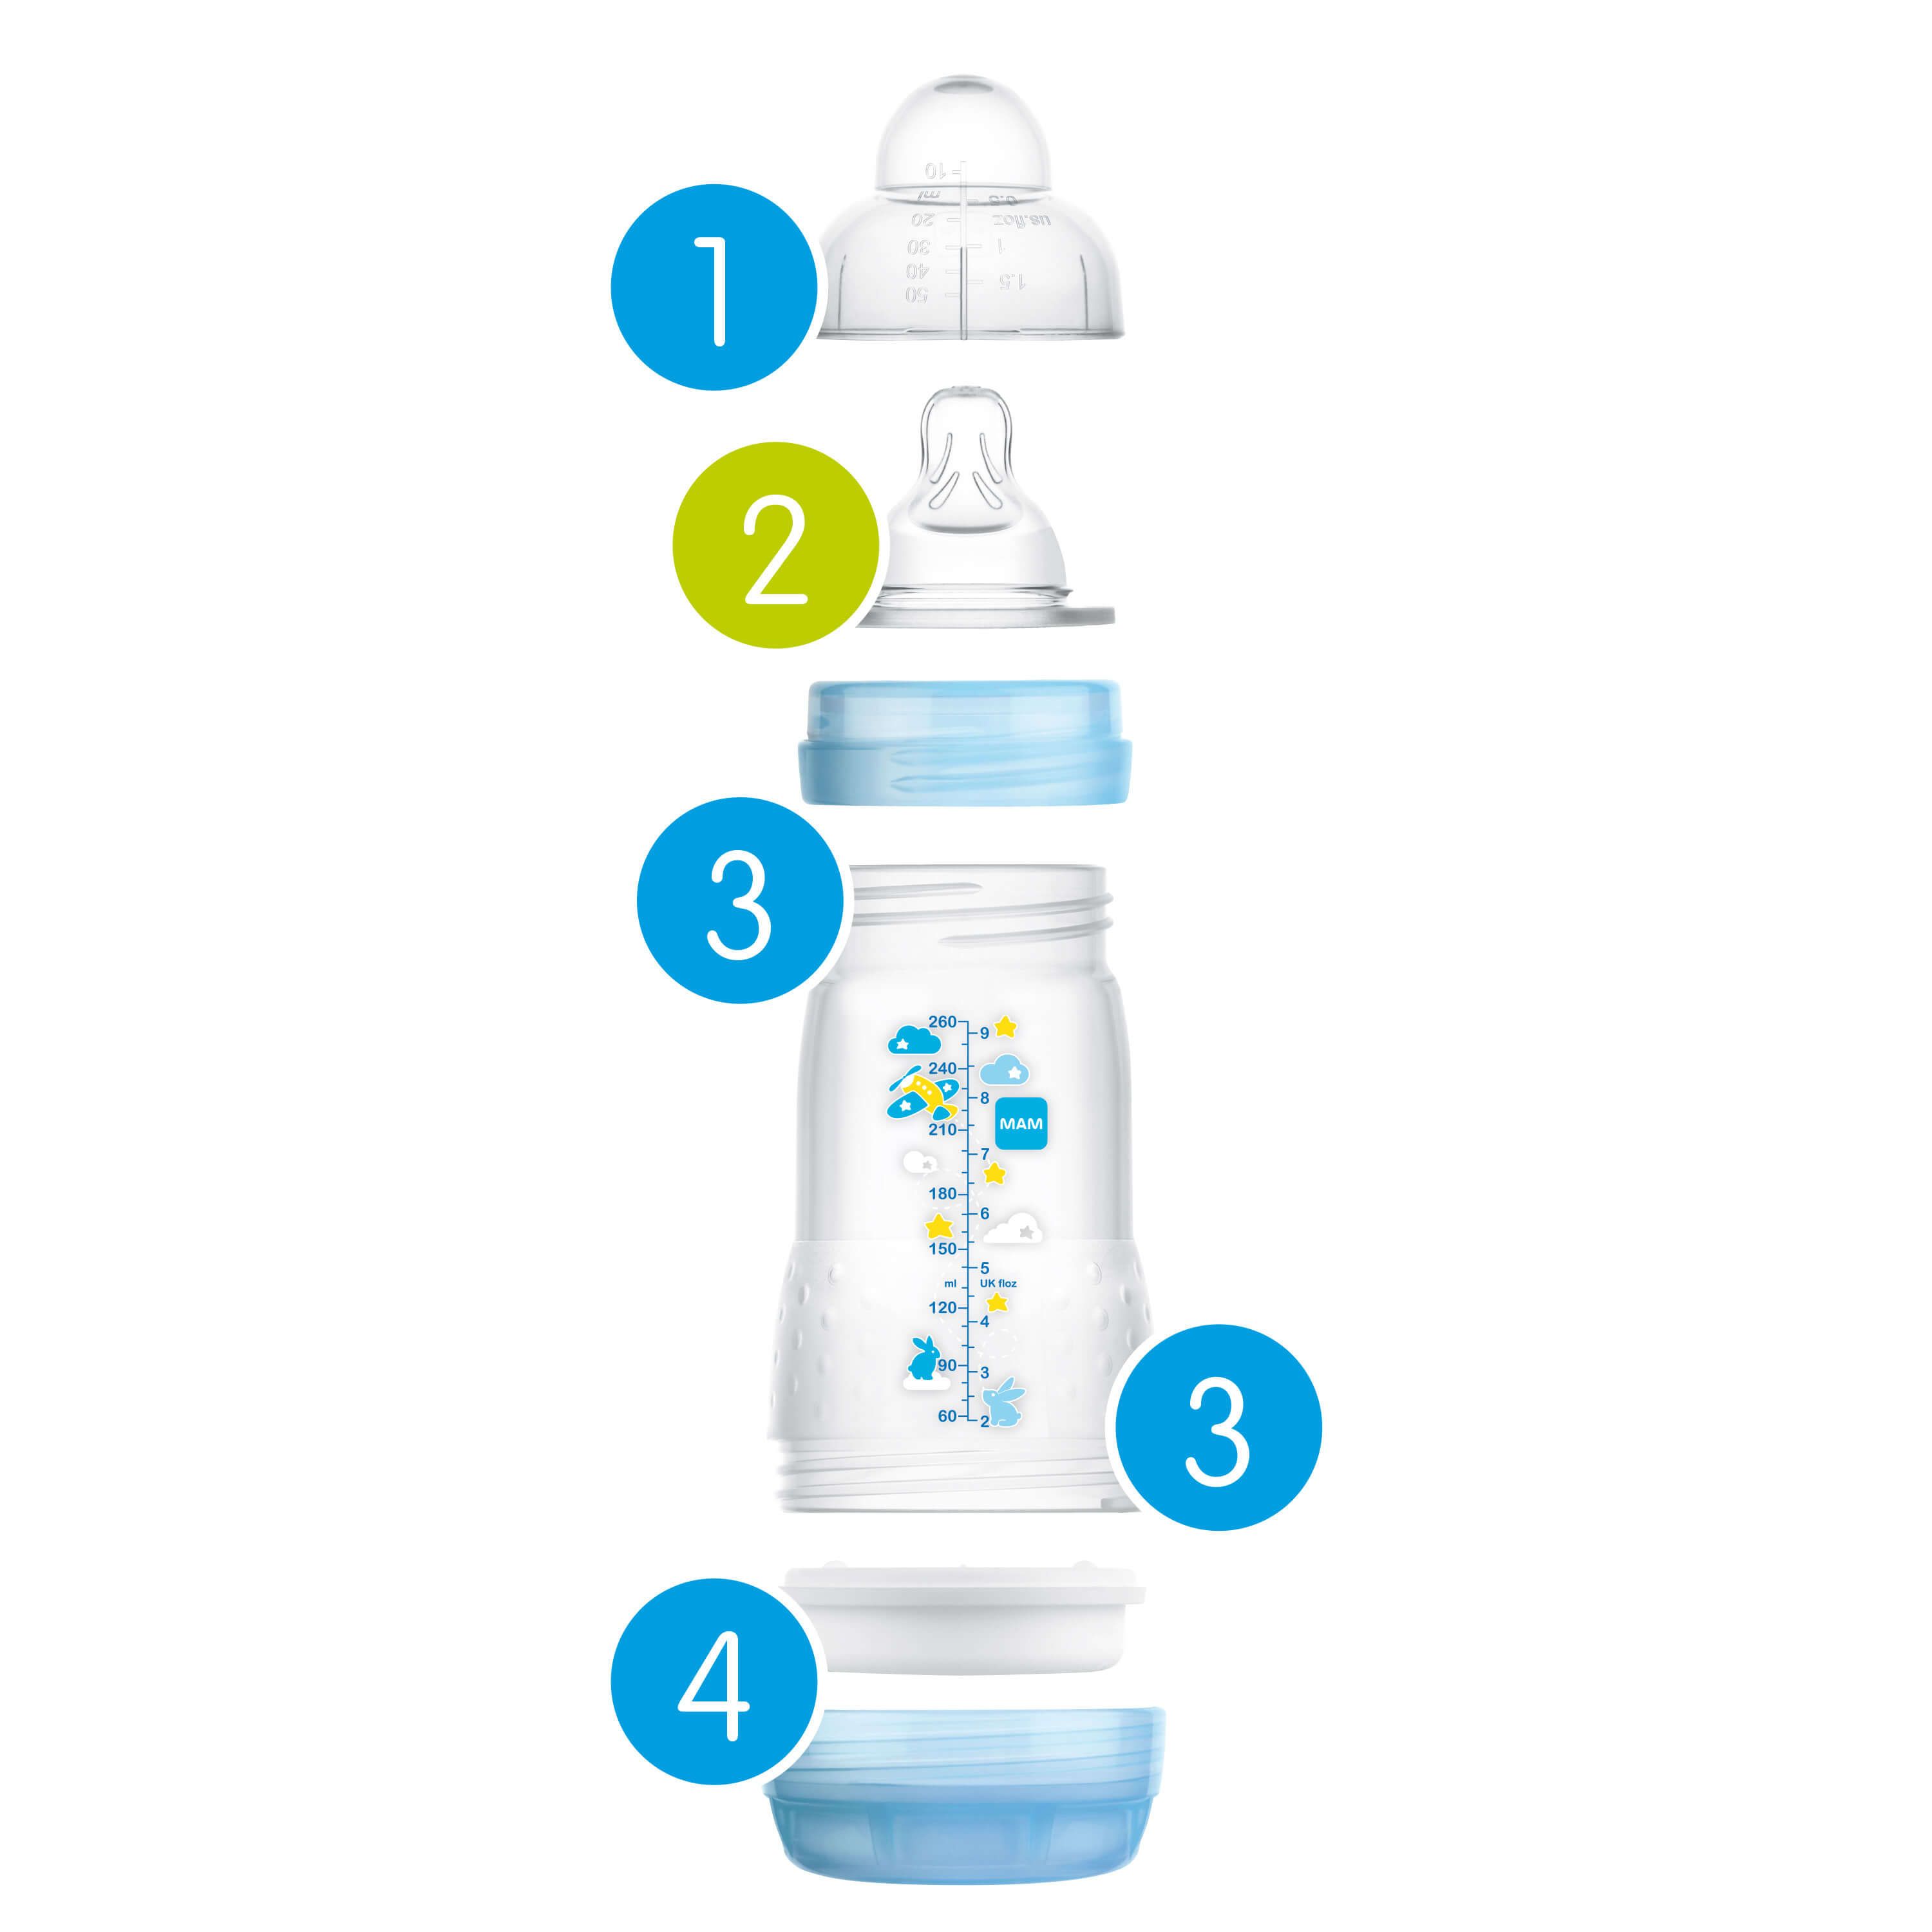 MAM Hold My Bottle Handles Pack of 2 Compatible with Wide Range of MAM Bottles 